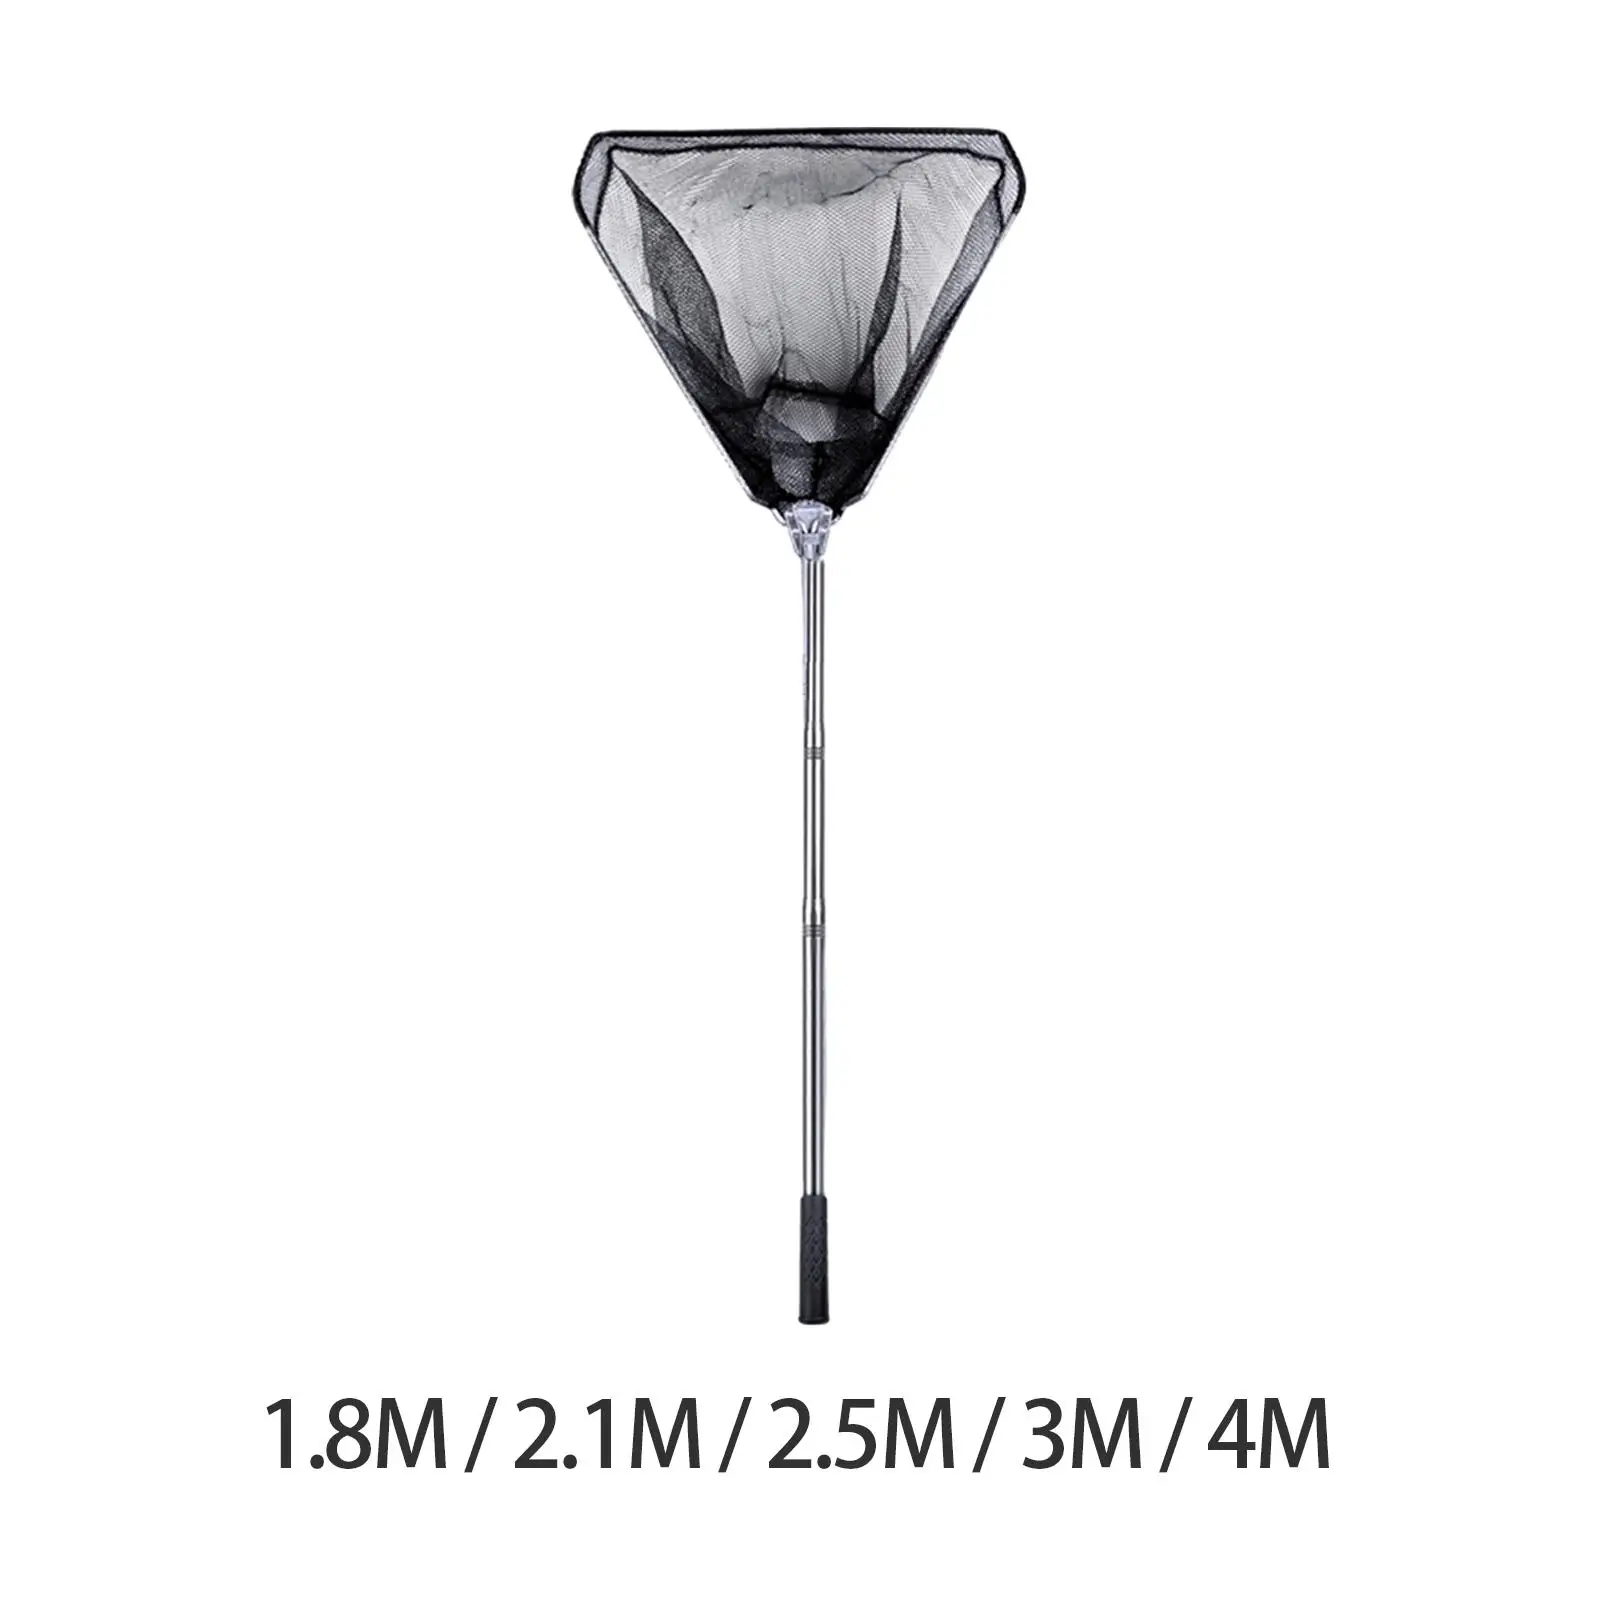 Floating Fish Net Foldable Pole Multipurpose Lightweight Collapsing Handle Accessories Stainless Steel Retractable for Men Gift